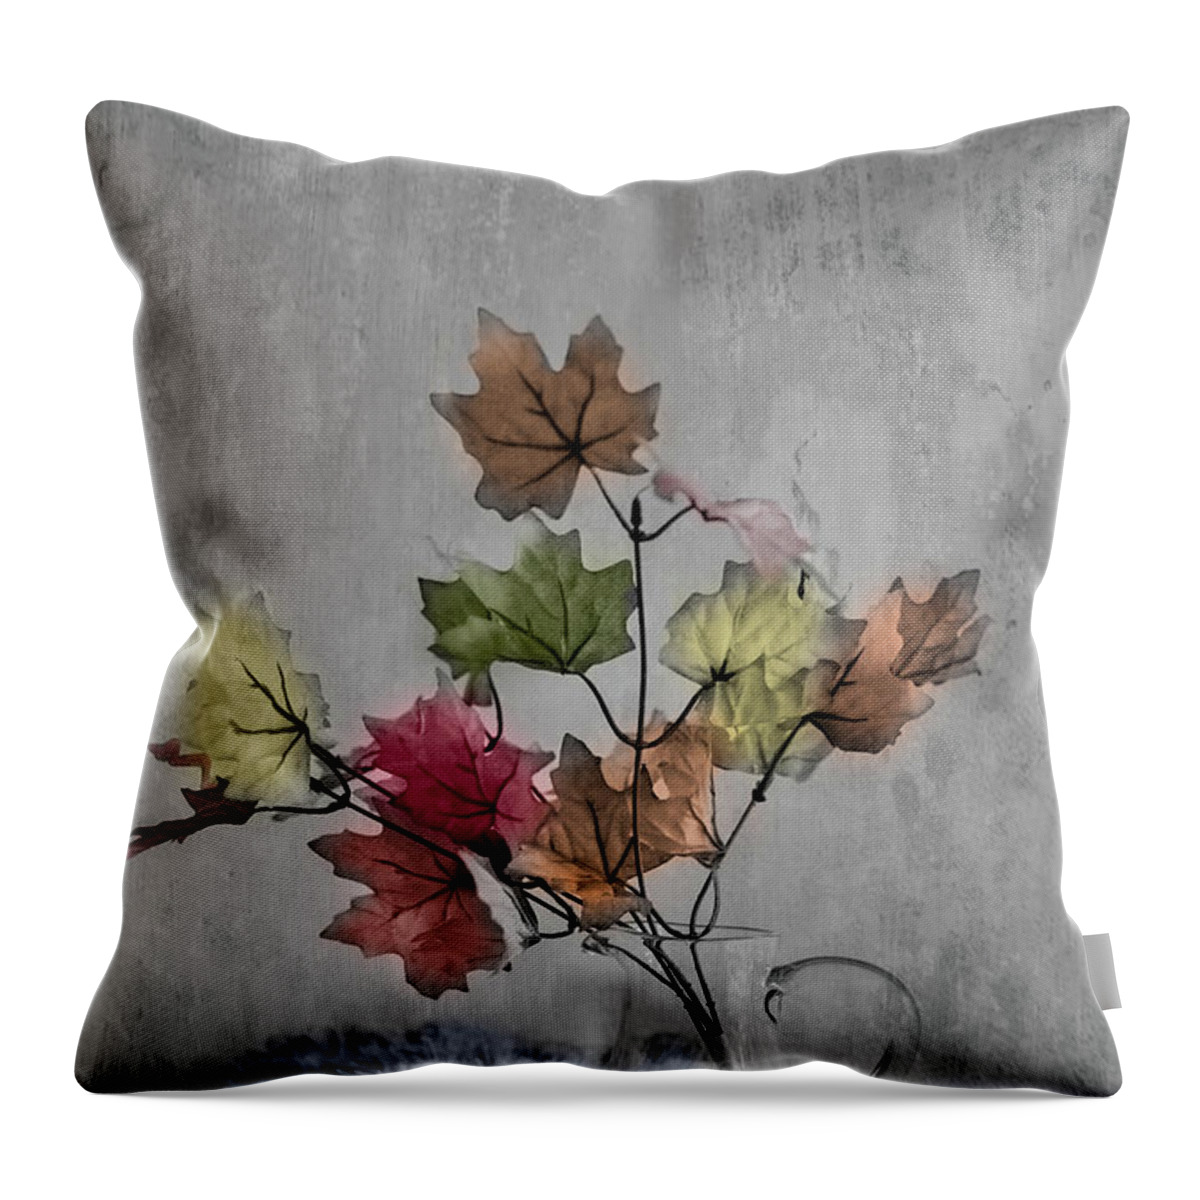 Colors Throw Pillow featuring the photograph Autumn Leaves by Elvira Pinkhas